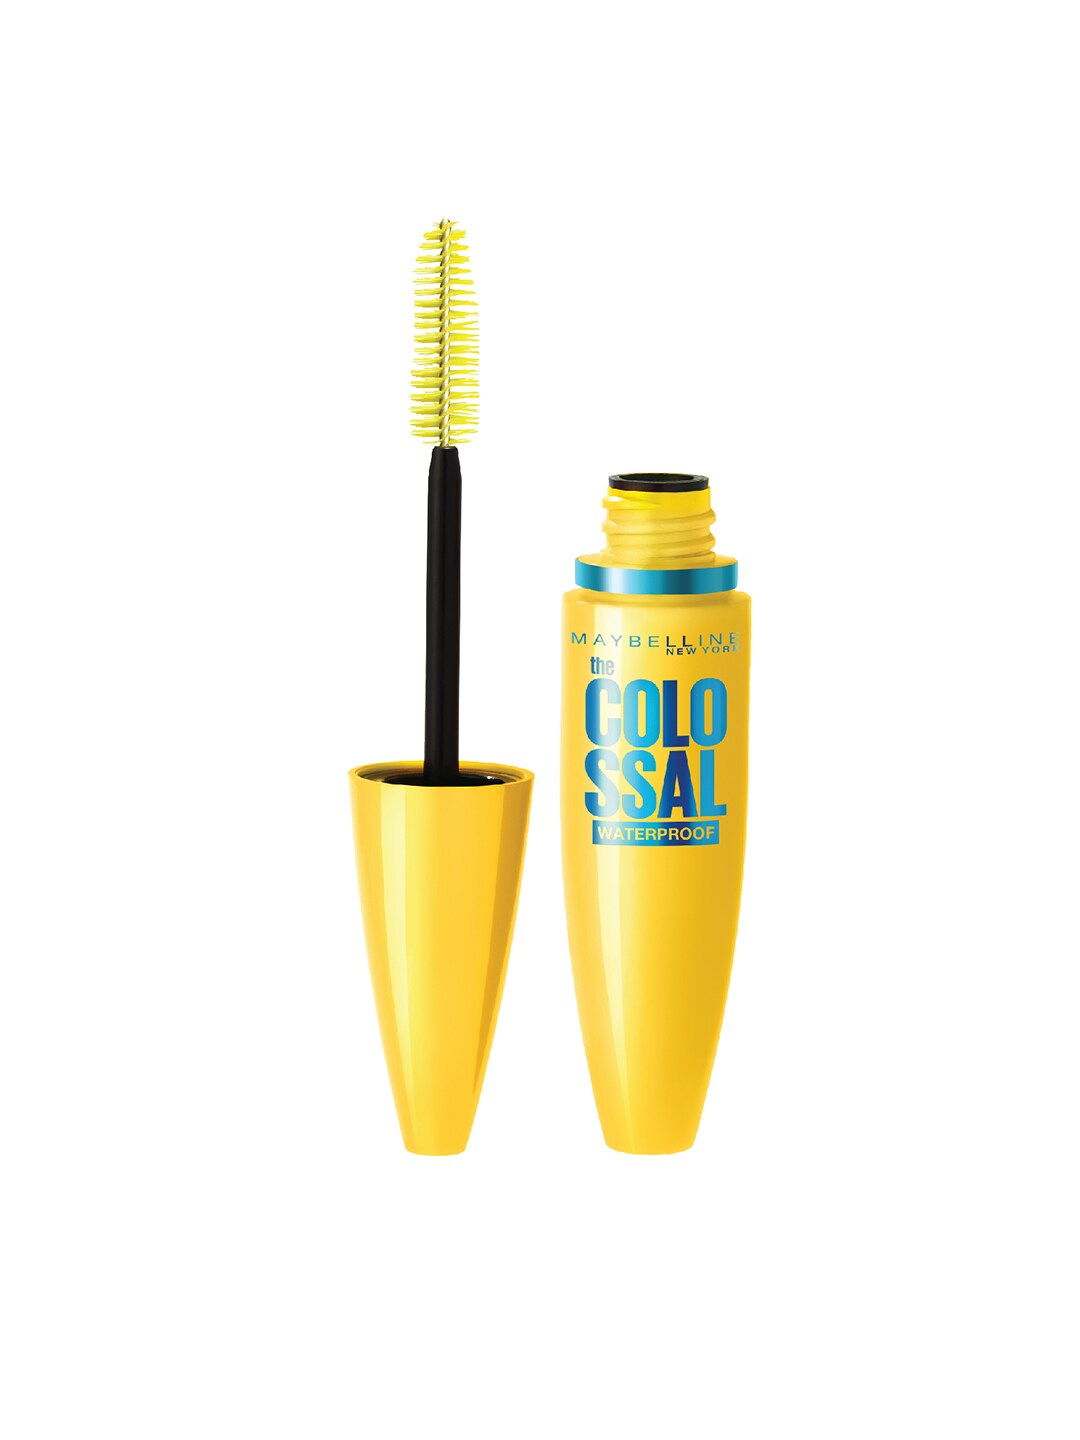 Maybelline New York Colossal Volume Express Waterproof Mascara - Black 10 g Price in India